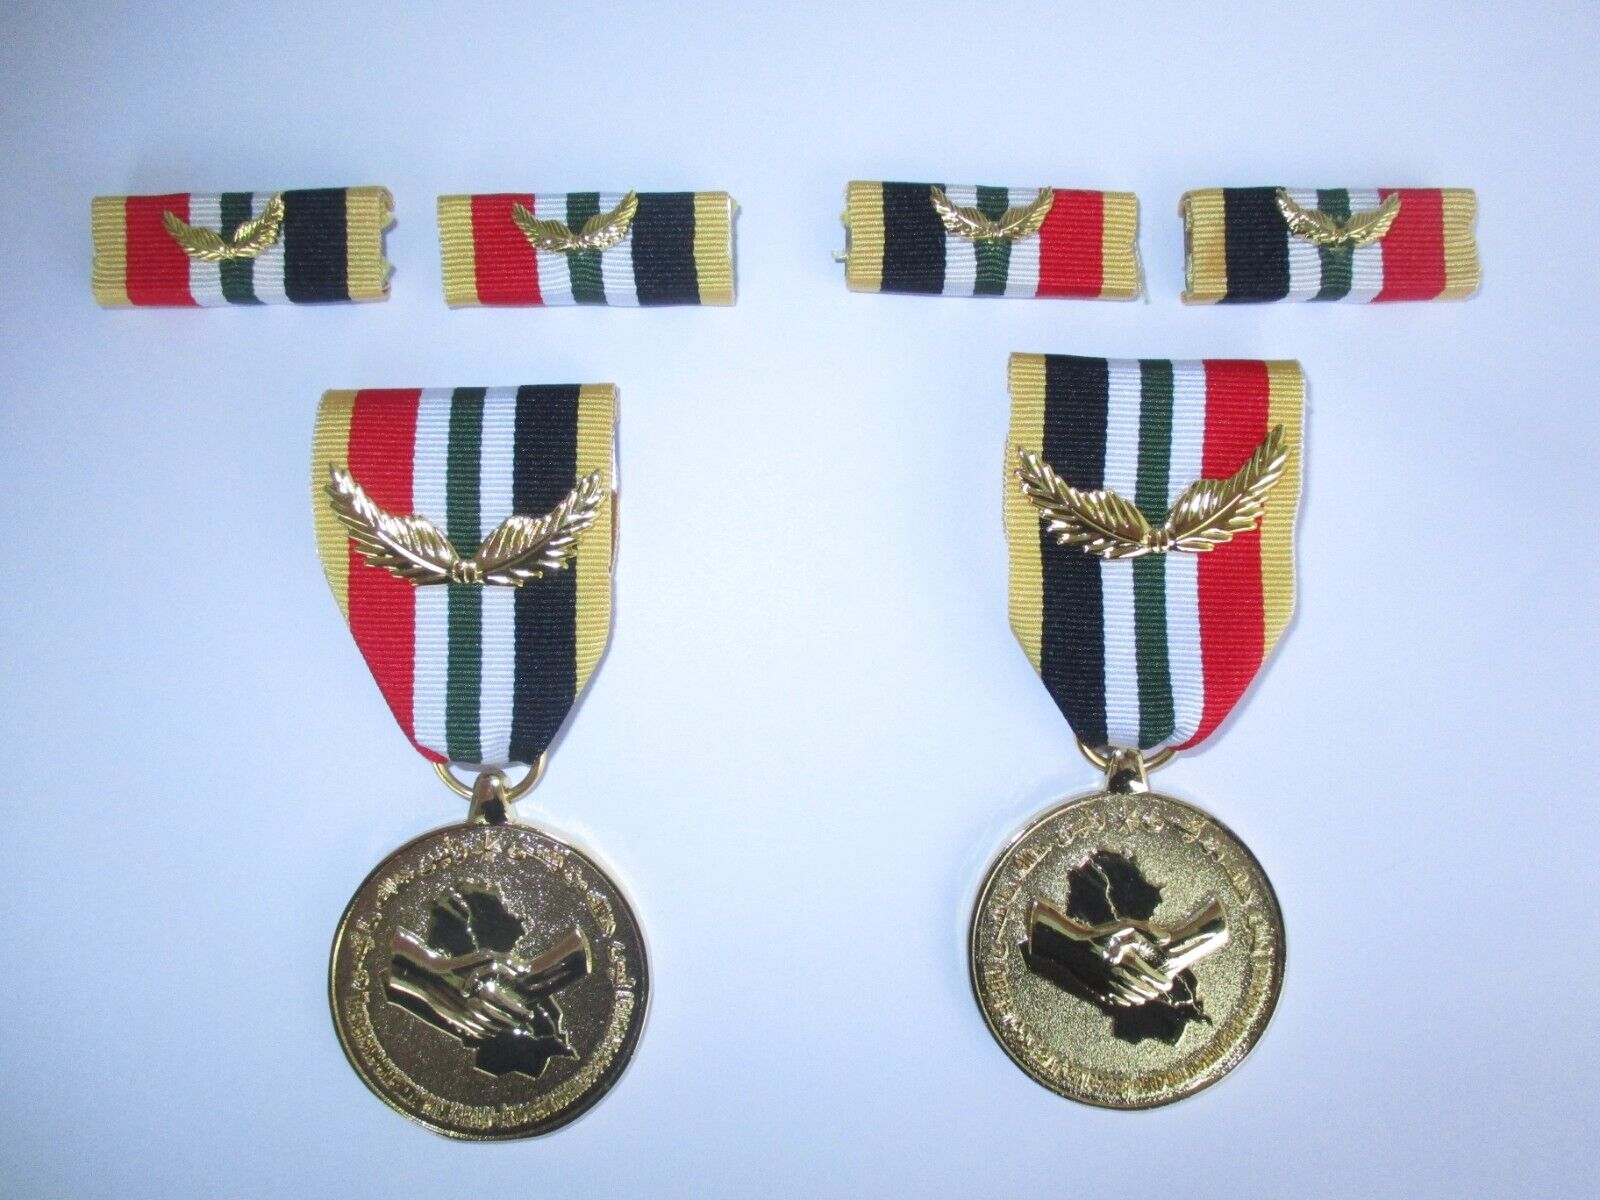 IRAQ COMMITMENT MEDALS (MILITARY & CIVILIAN VERSION) WITH SERVICE RIBBONS 